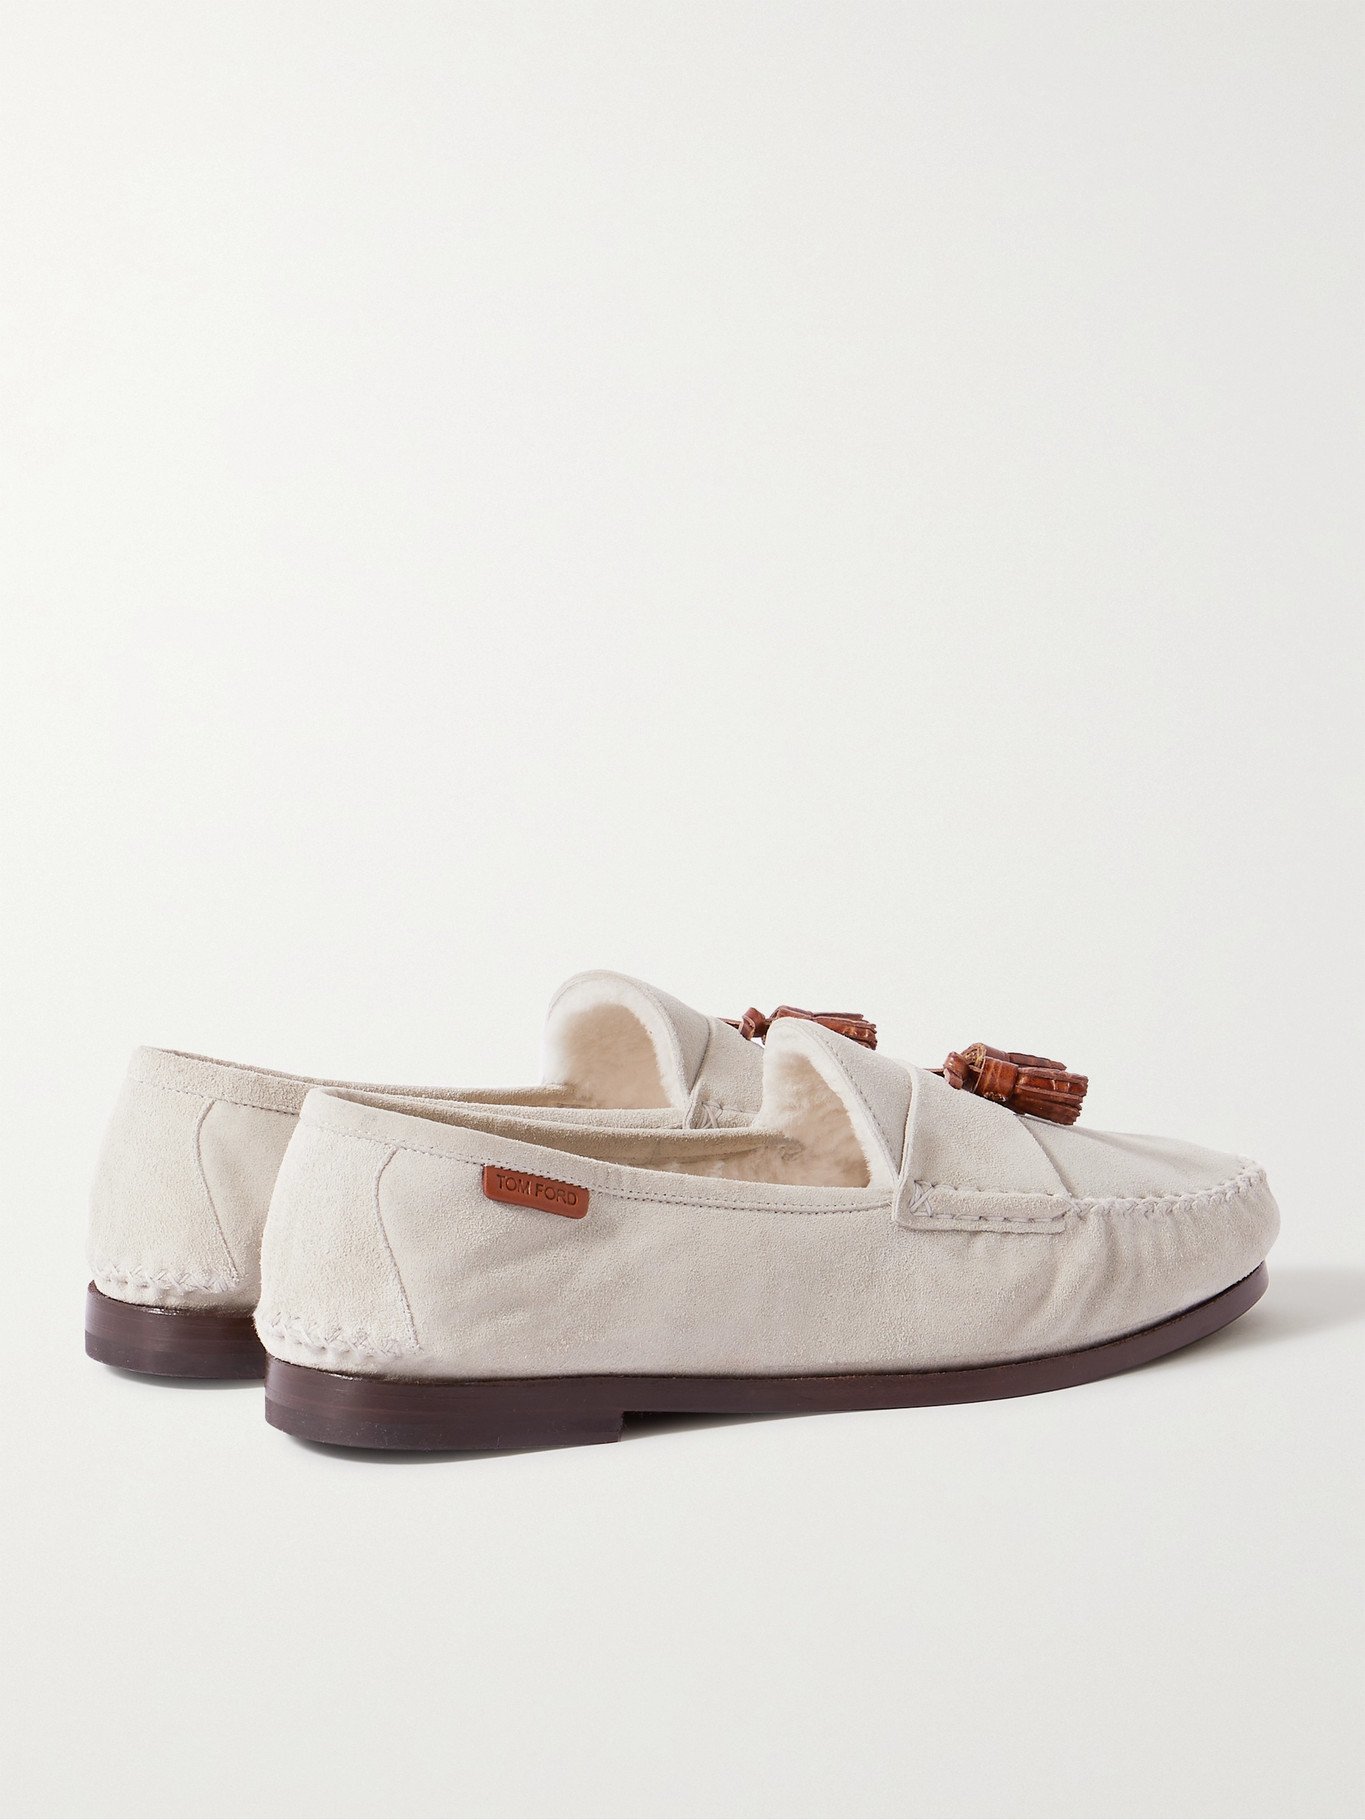 TOM FORD - Berwick Shearling-Lined Tasselled Suede Loafers - White TOM FORD